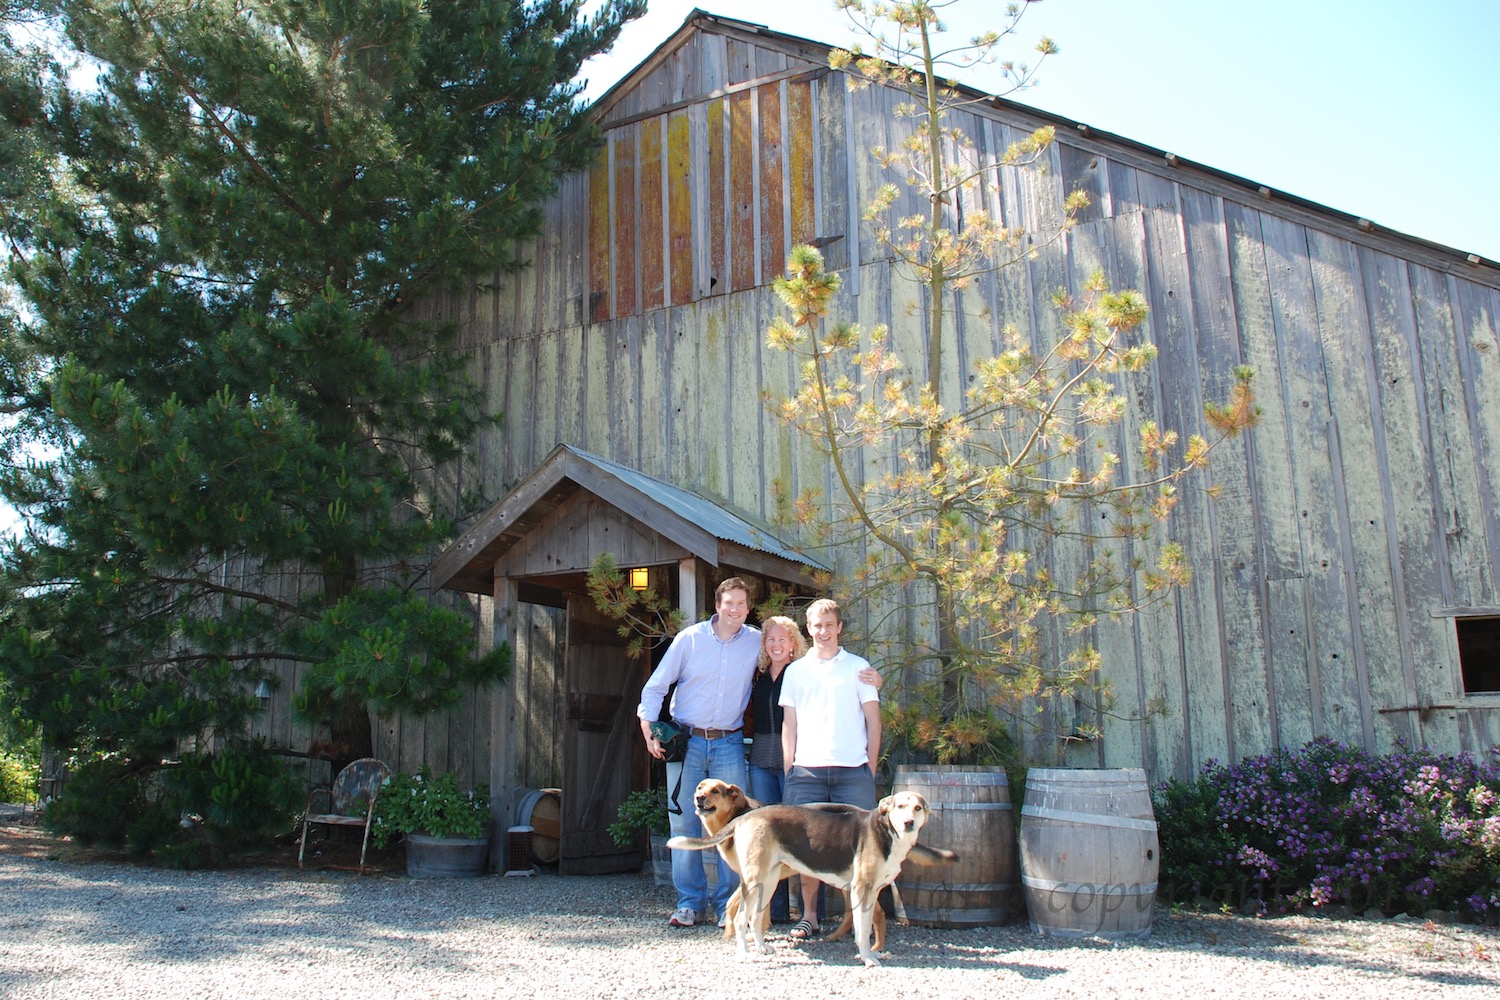 Our First Winery! (2008)